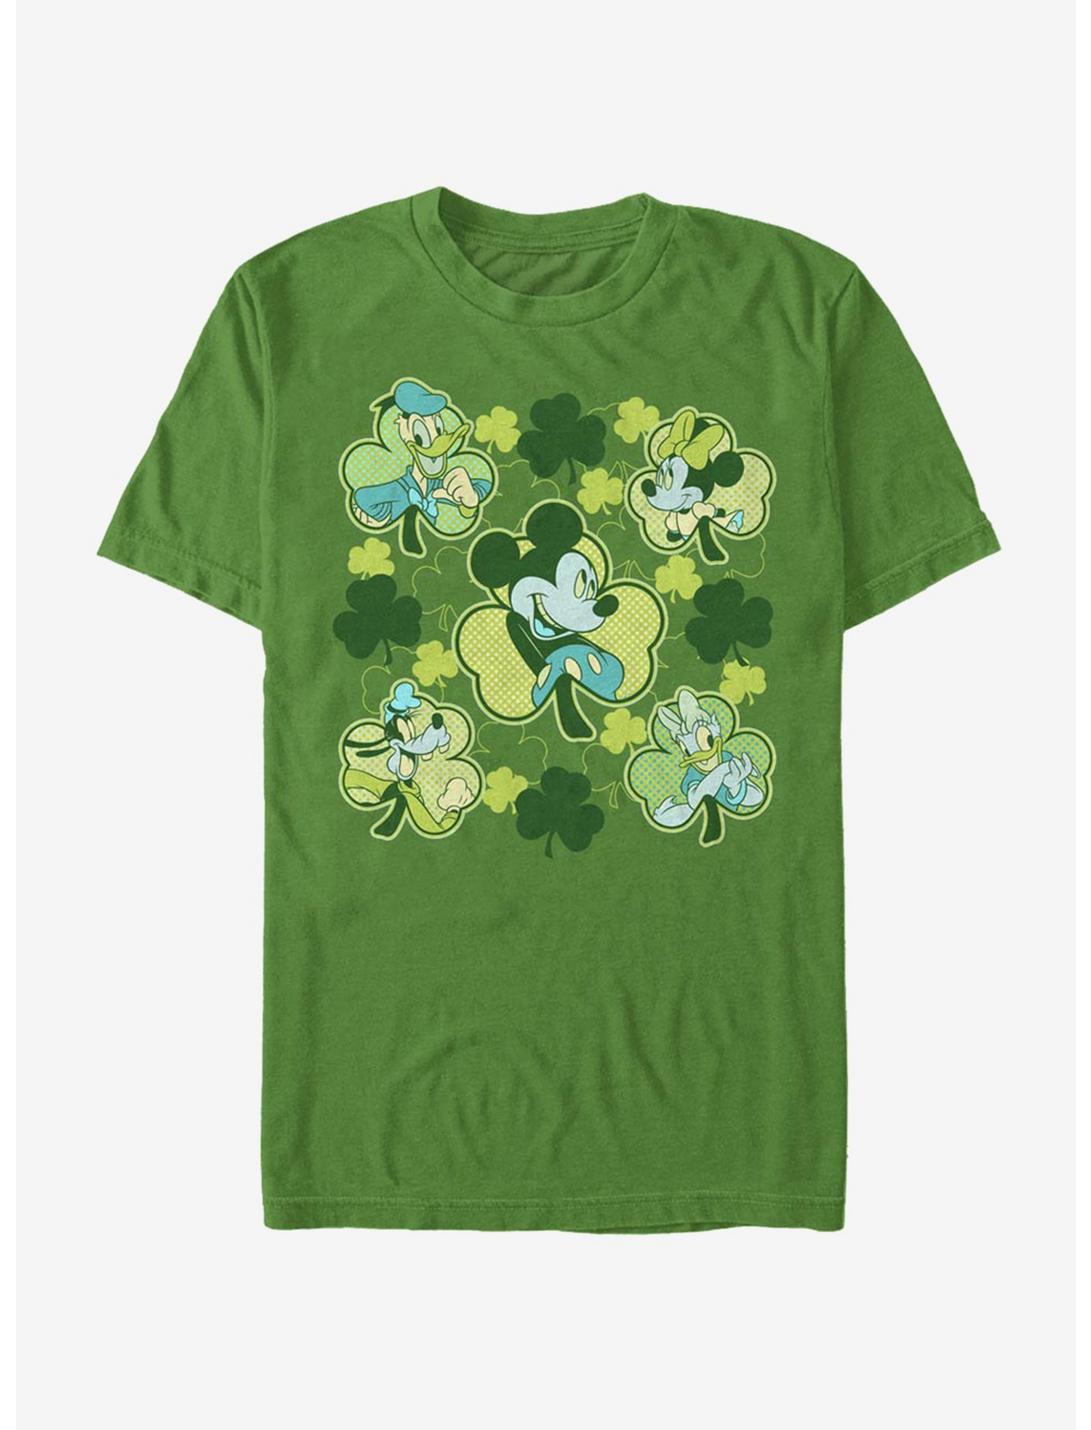 Disney Mickey Mouse Friends Clovers T-Shirt, KELLY, hi-res